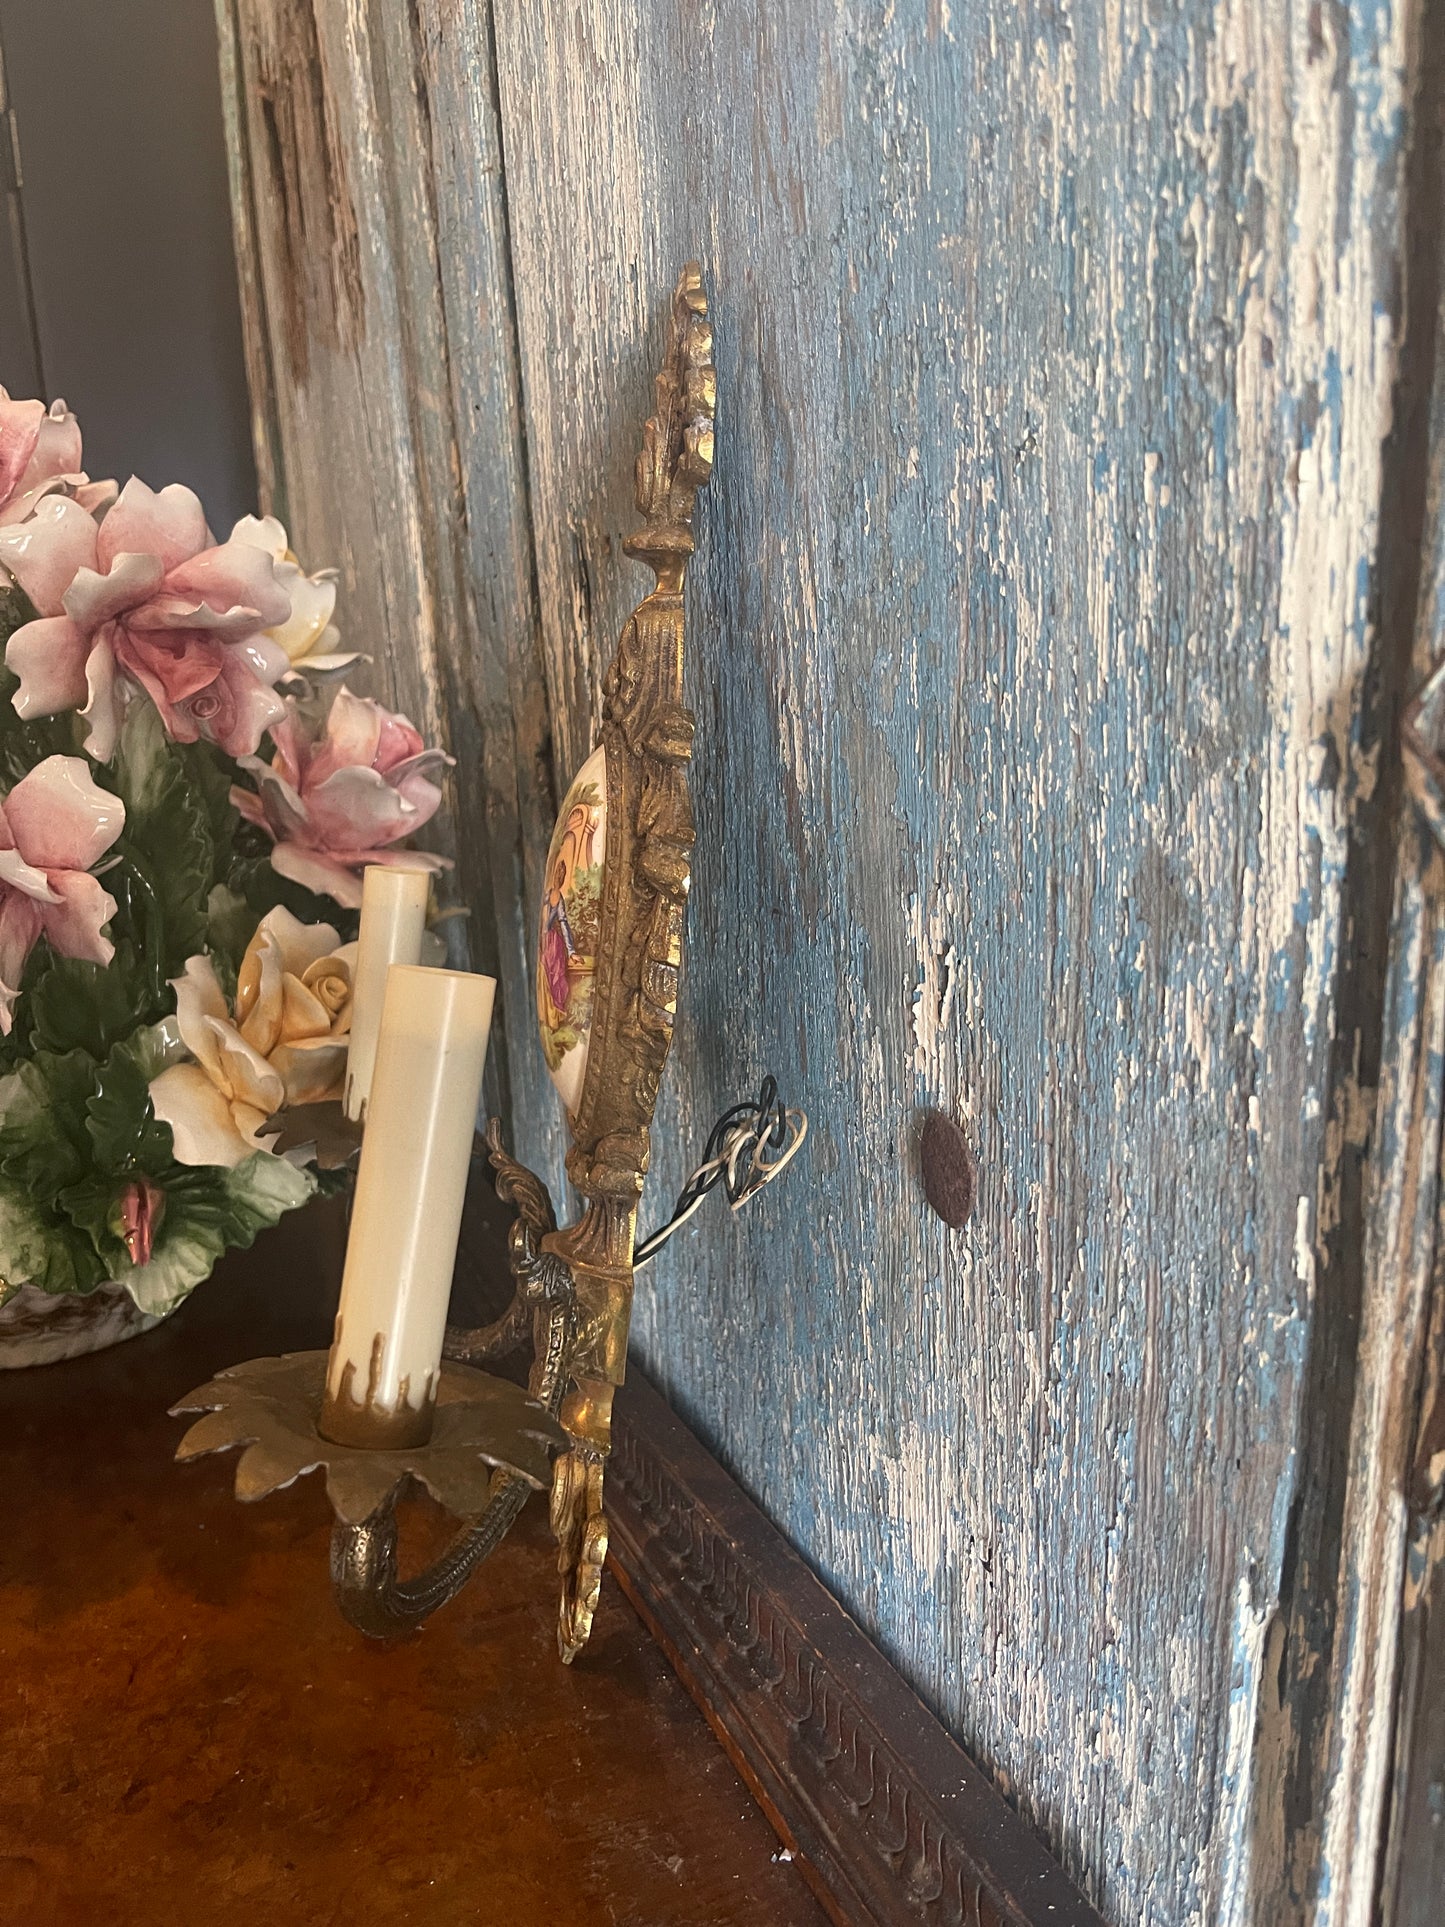 Vintage French Courting Wired Wall Sconces, Ormolu and Porcelain, Made in Spain